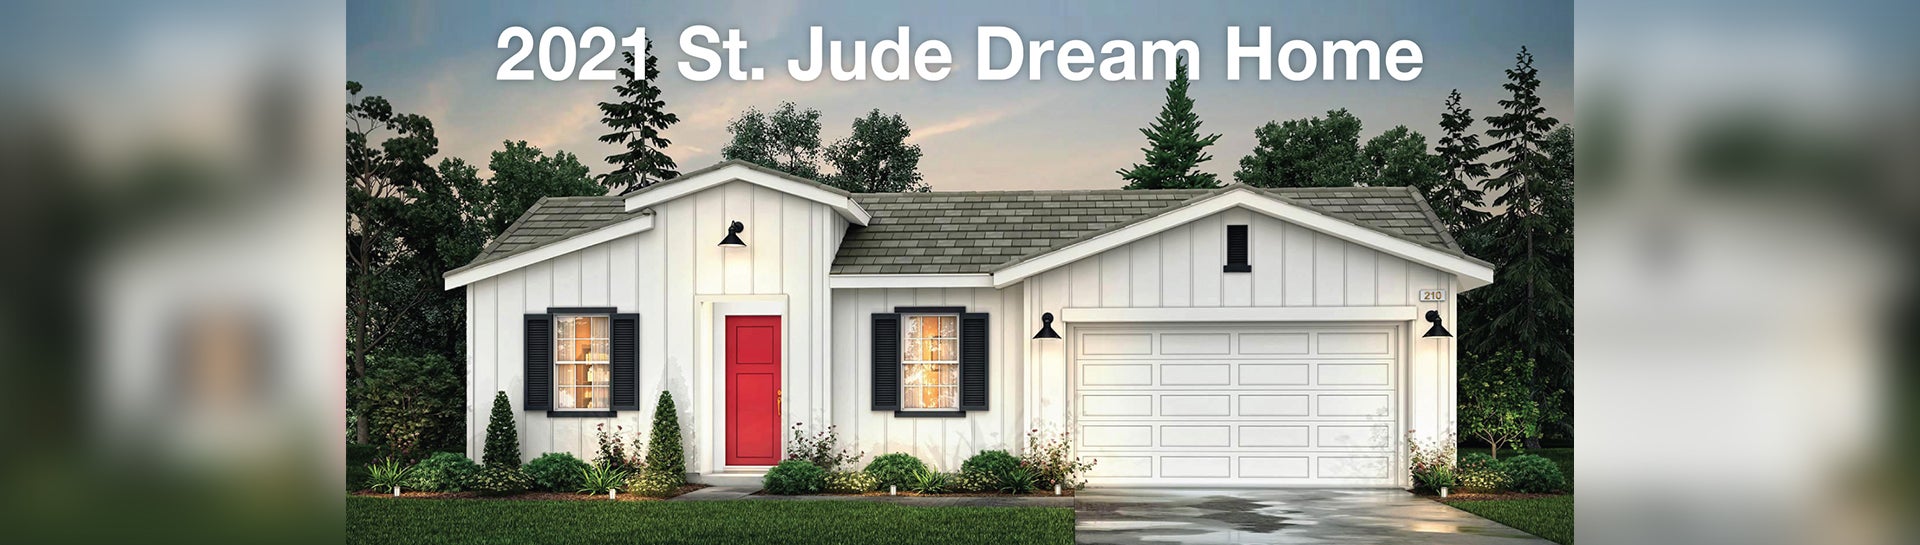 Central Valley St. Jude Dream Home® Giveaway Raises $1,000,000 For St. Jude Children’s Research Hospital